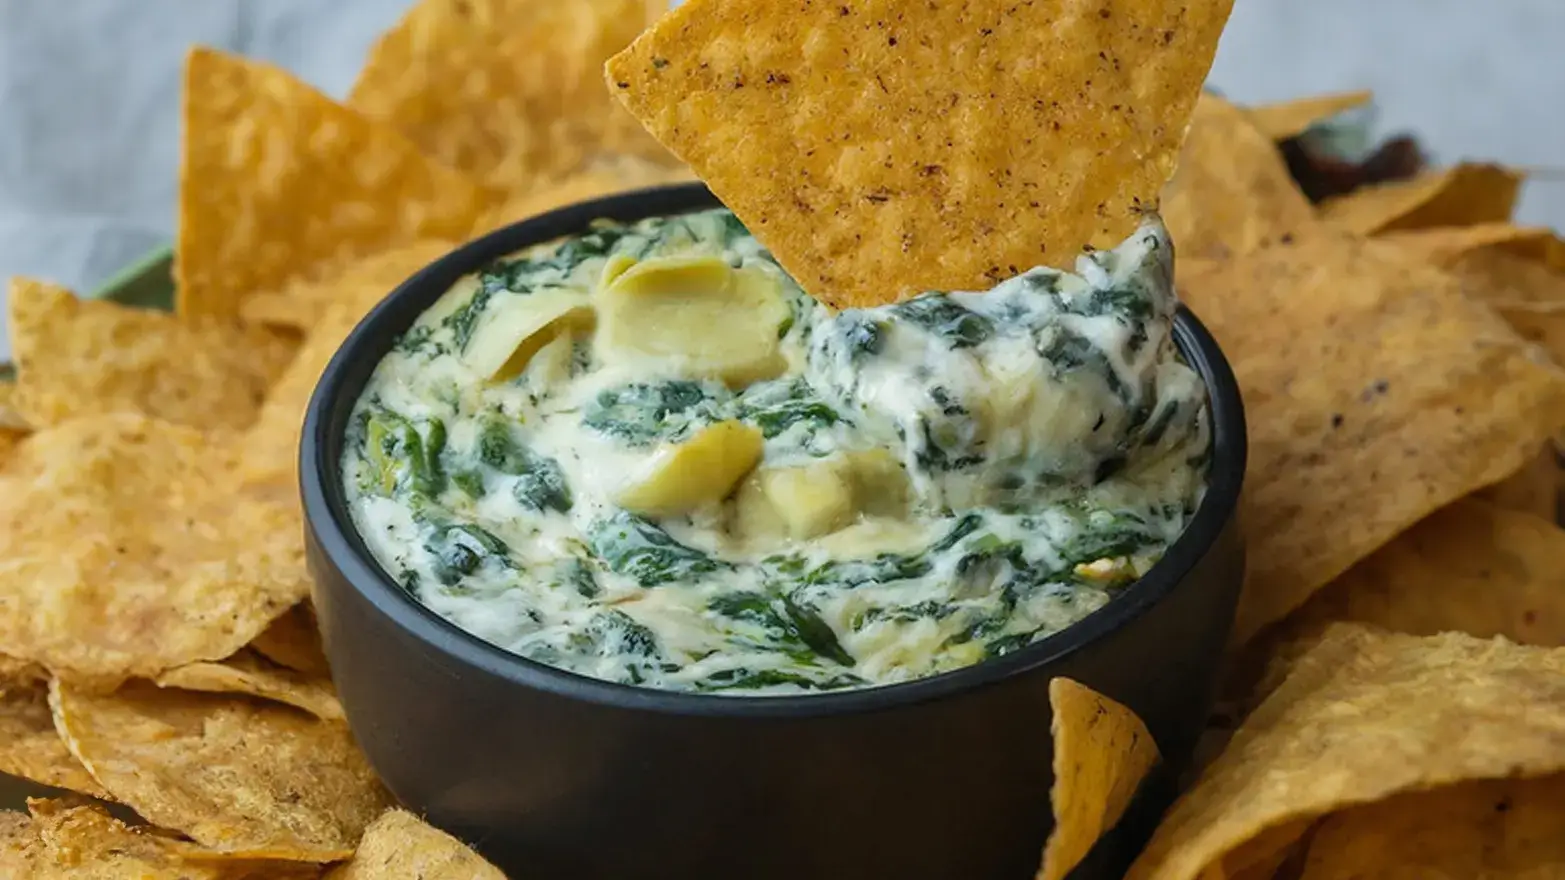 Spinach artichoke dip with chips